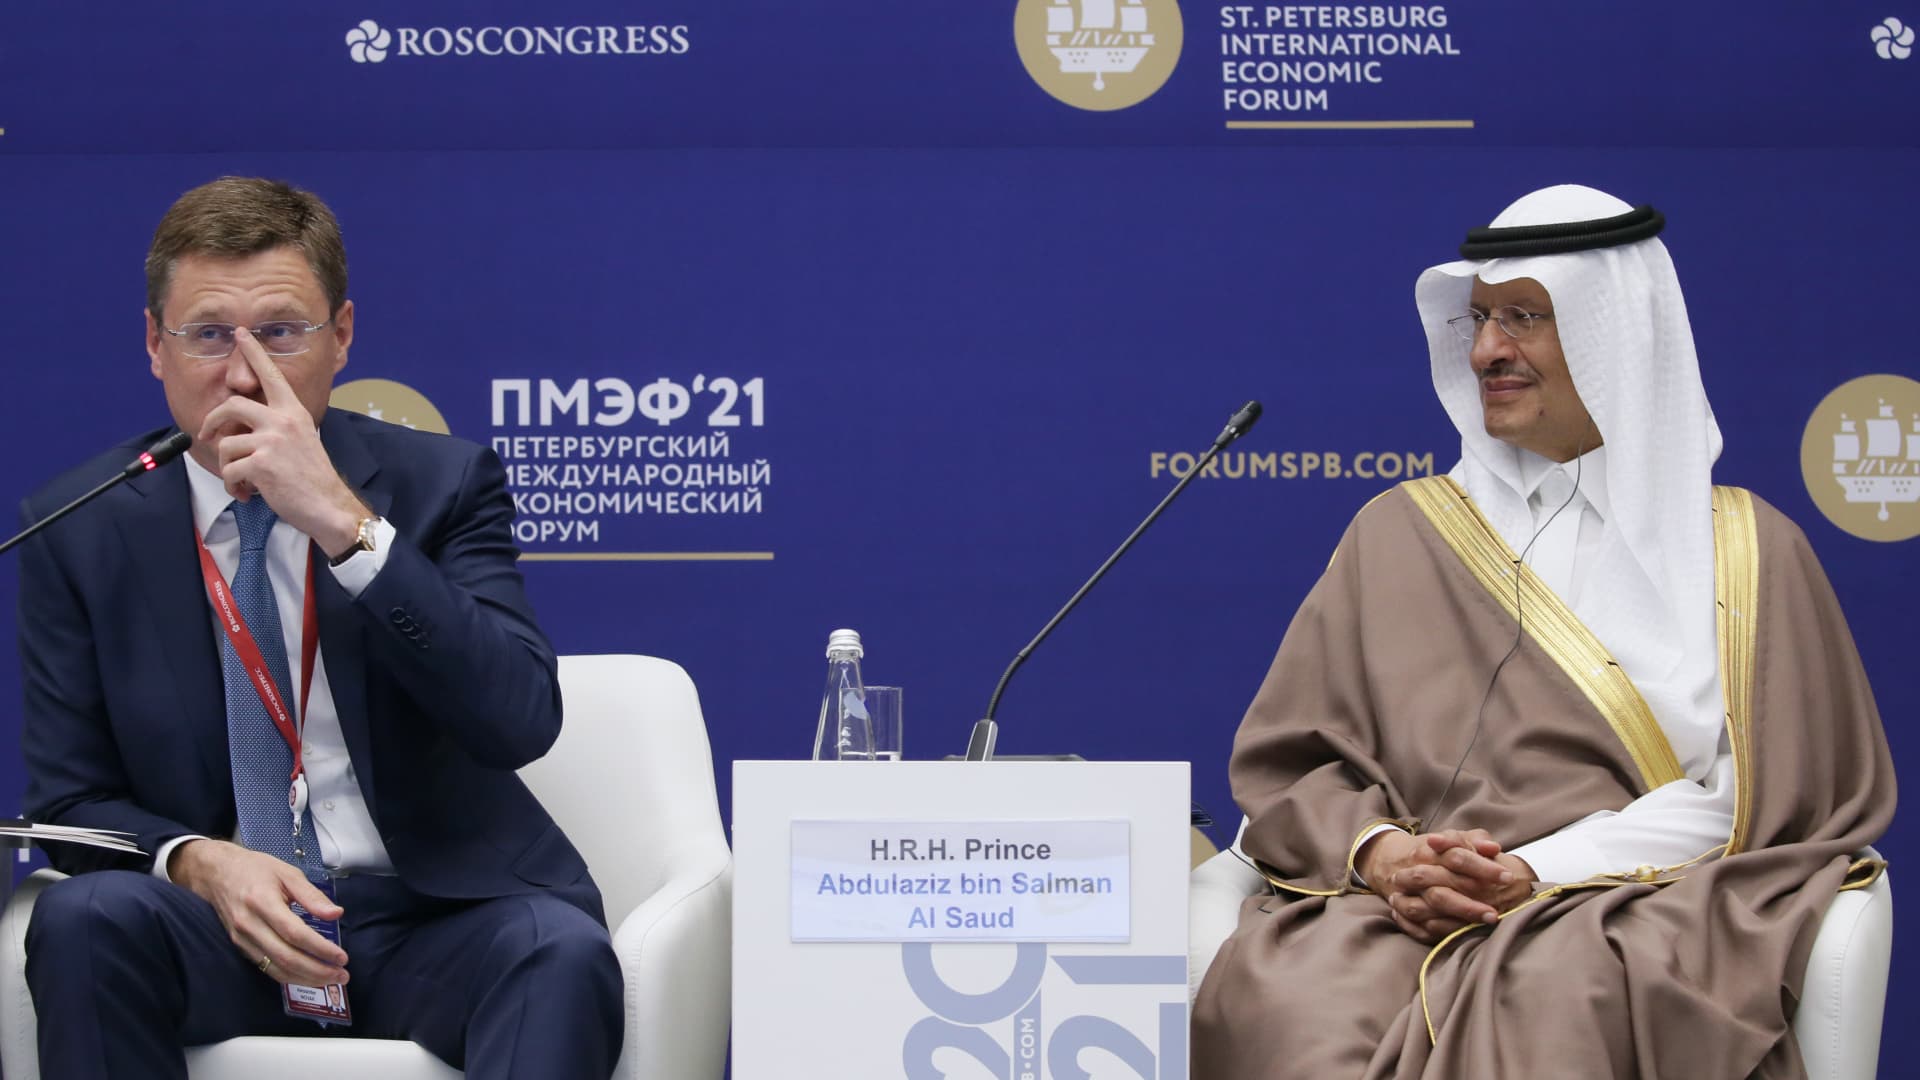 Russia's Deputy Prime Minster Alexander Novak (L) and Saudi Arabia's Energy Minister Abdulaziz bin Salman Al Saud attend a session as part of the 24th St Petersburg International Economic Forum (SPIEF 2021) at the ExpoForum Convention and Exhibition Center.